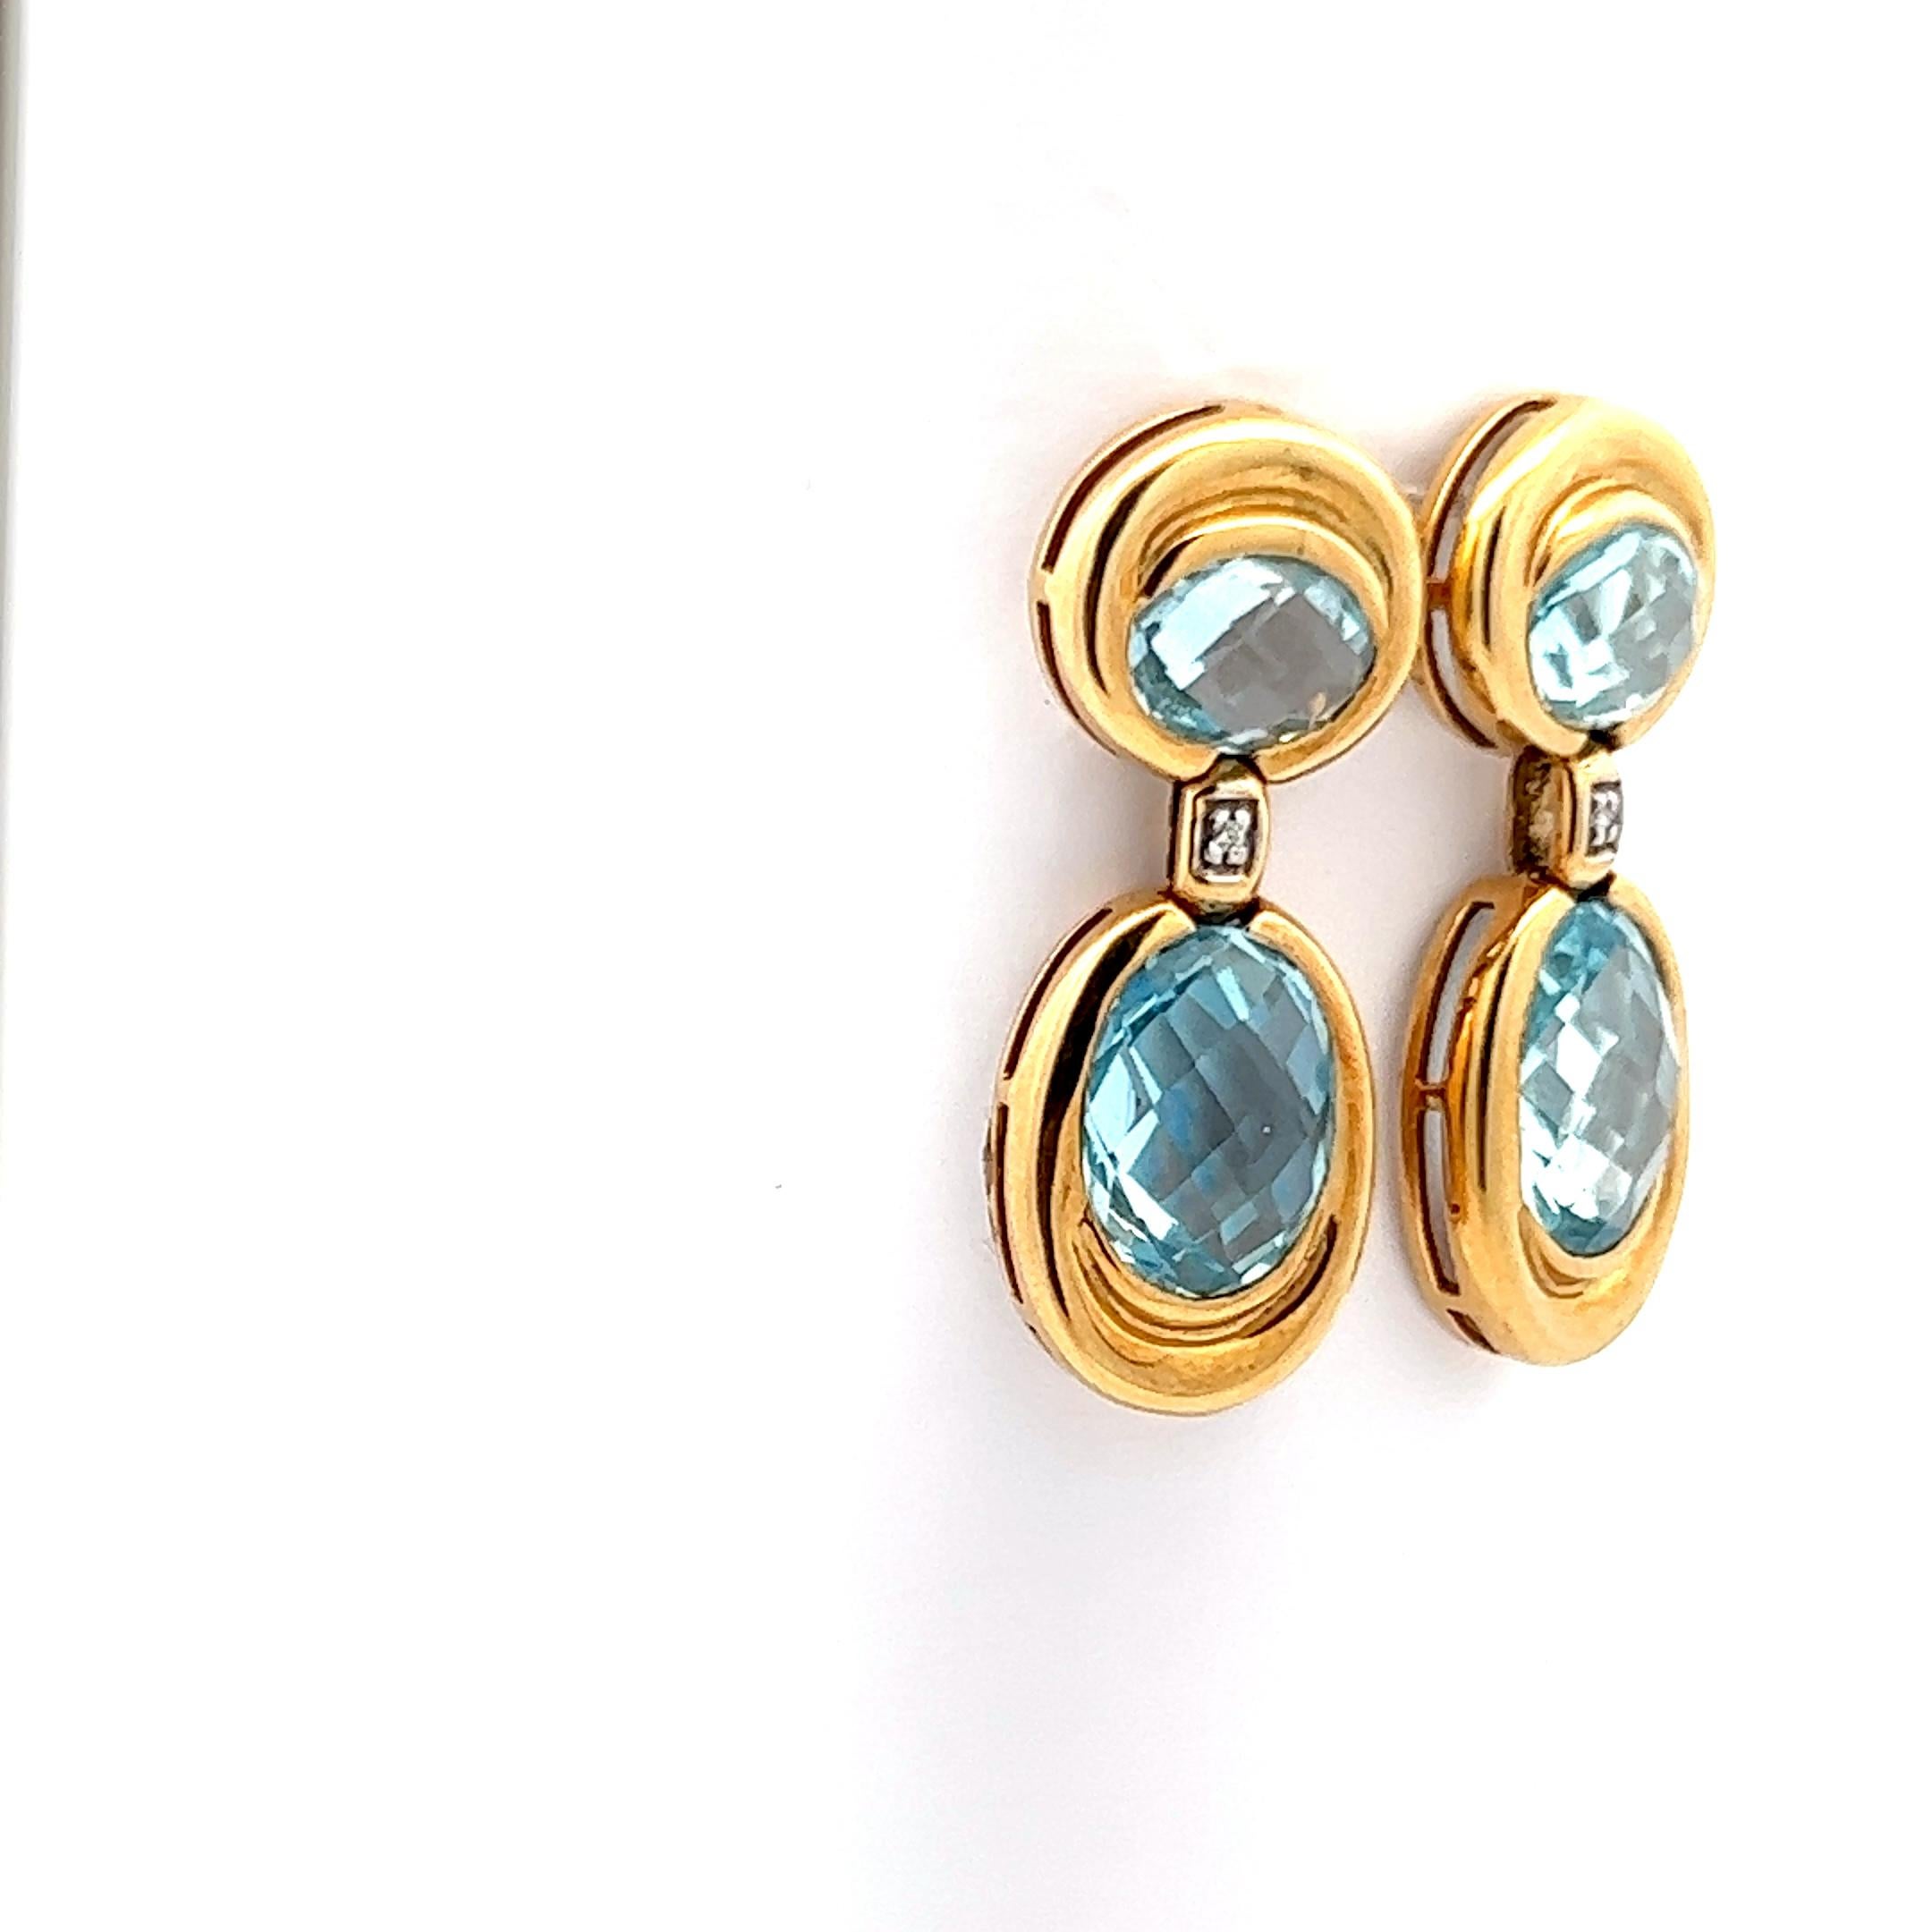 This is a gorgeous pair of contemporary aquamarine and diamond earrings made in 18k yellow gold. The earrings feature four = 10 cttw aquamarines with a beautiful blue hue, renascent of clear blue ocean waters. The earrings effortlessly capture